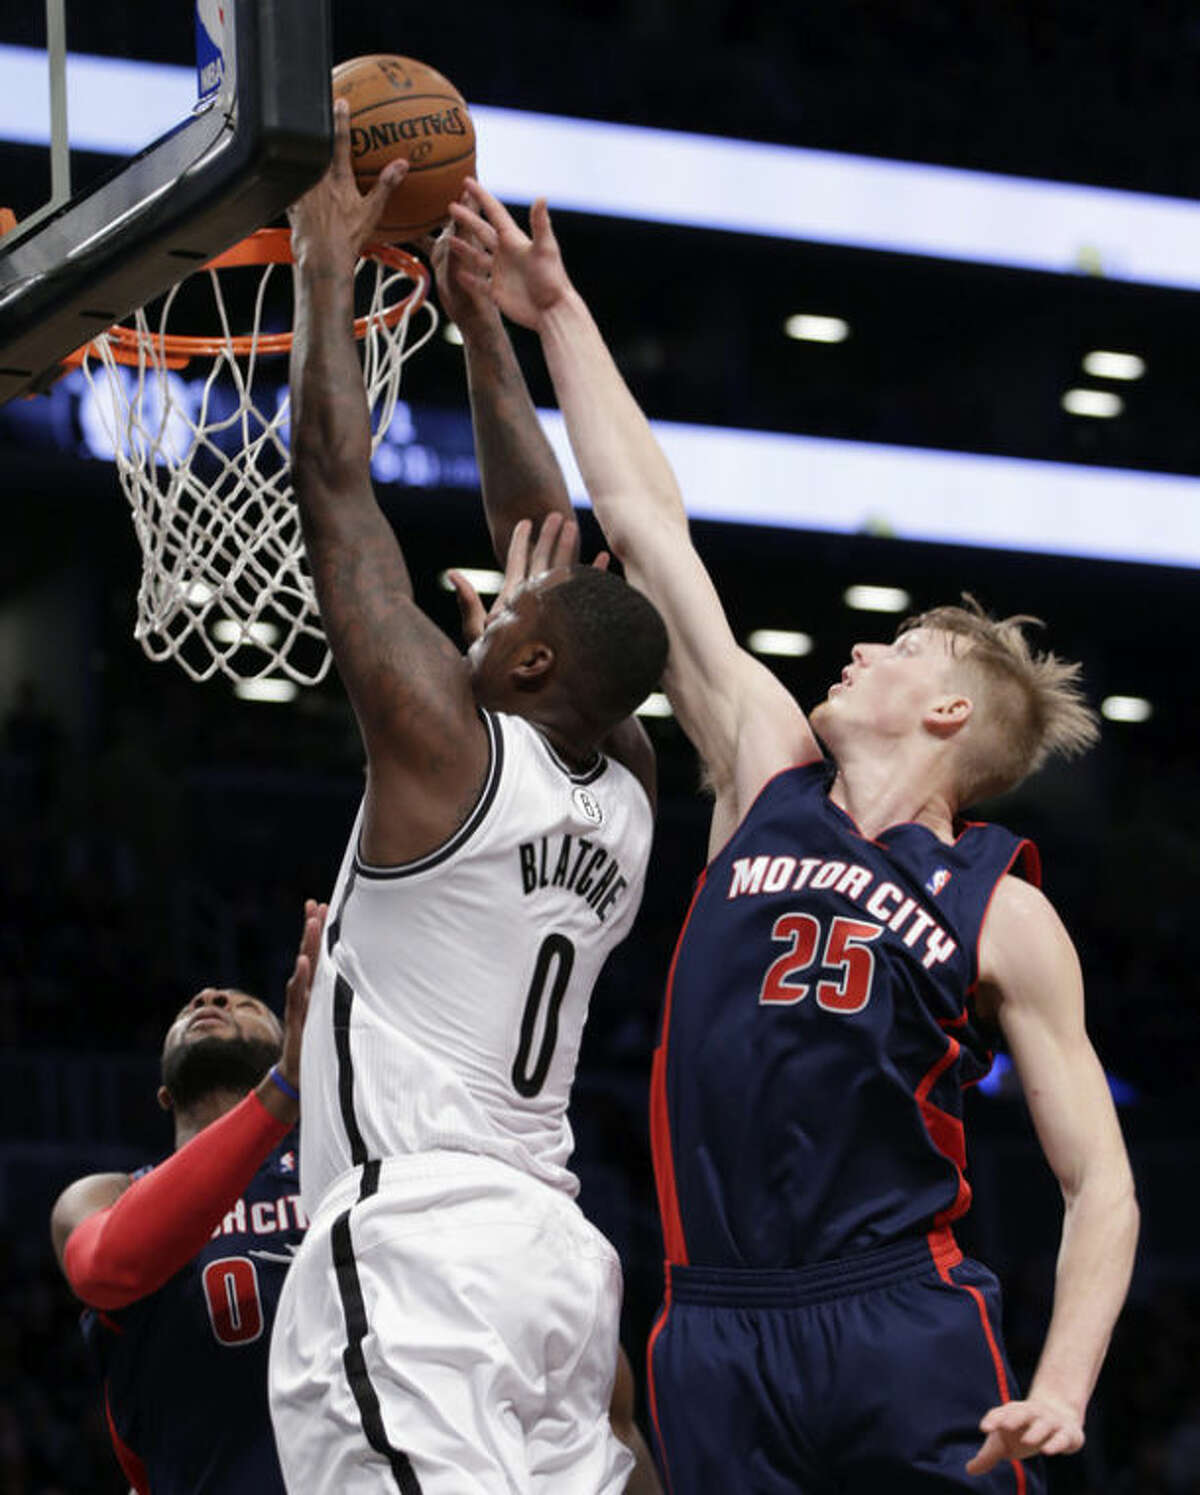 Detroit Pistons forward Kyle Singler (25) tries to block a shot by Brooklyn Nets center Andray Blatche (0) in the first half of an NBA basketball game, Sunday, Nov. 24, 2013, in New York. (AP Photo/Kathy Willens)